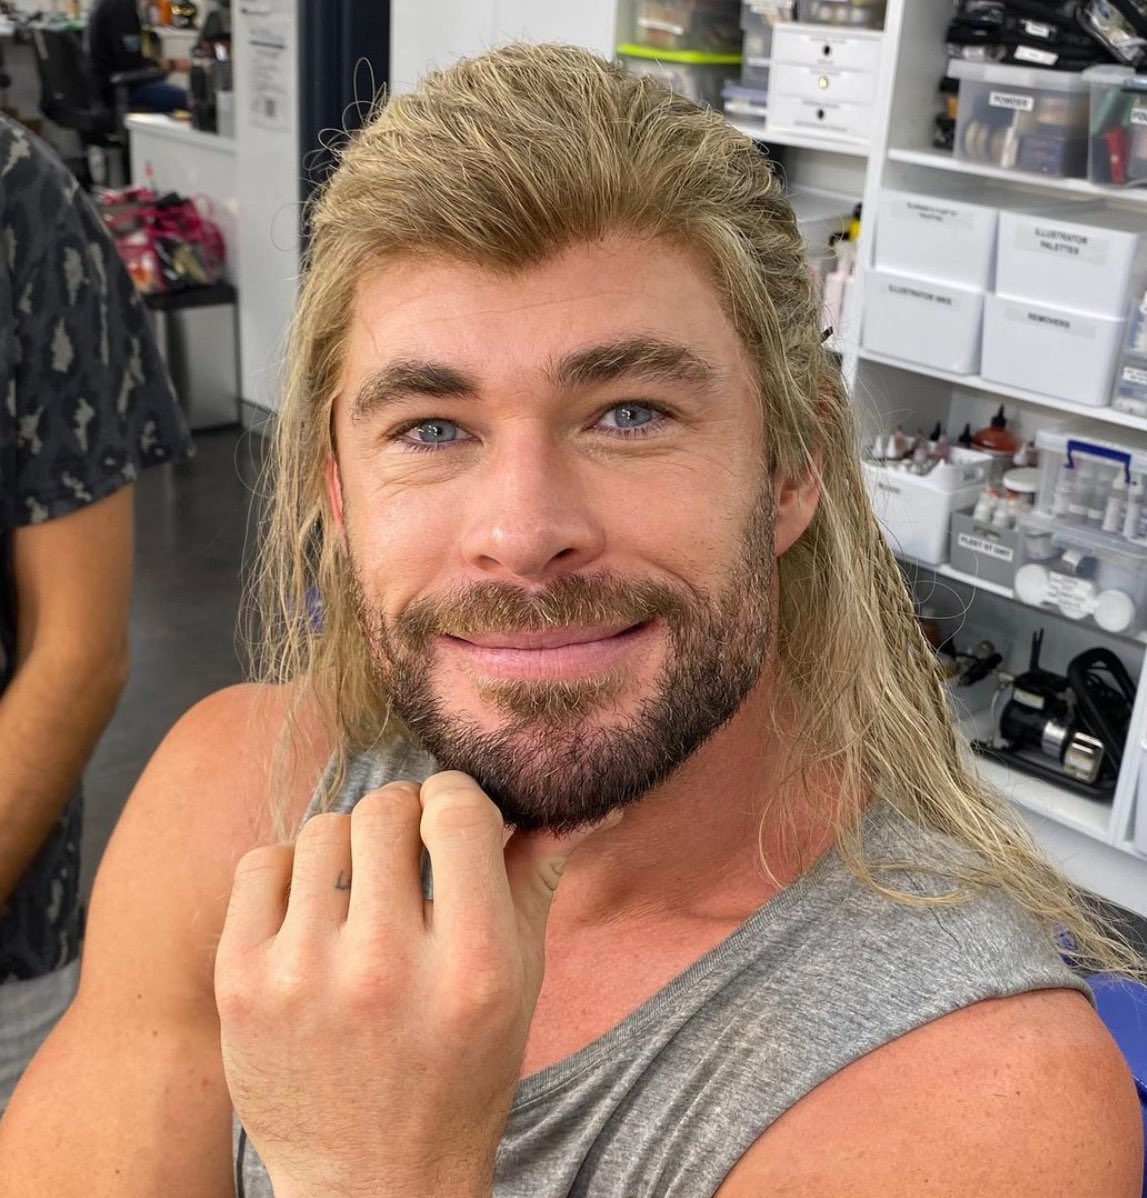 RT @civiiswar: who gave chris hemsworth such a dry wig for thor 4 i’m gonna fight them https://t.co/akBNxPNX7g